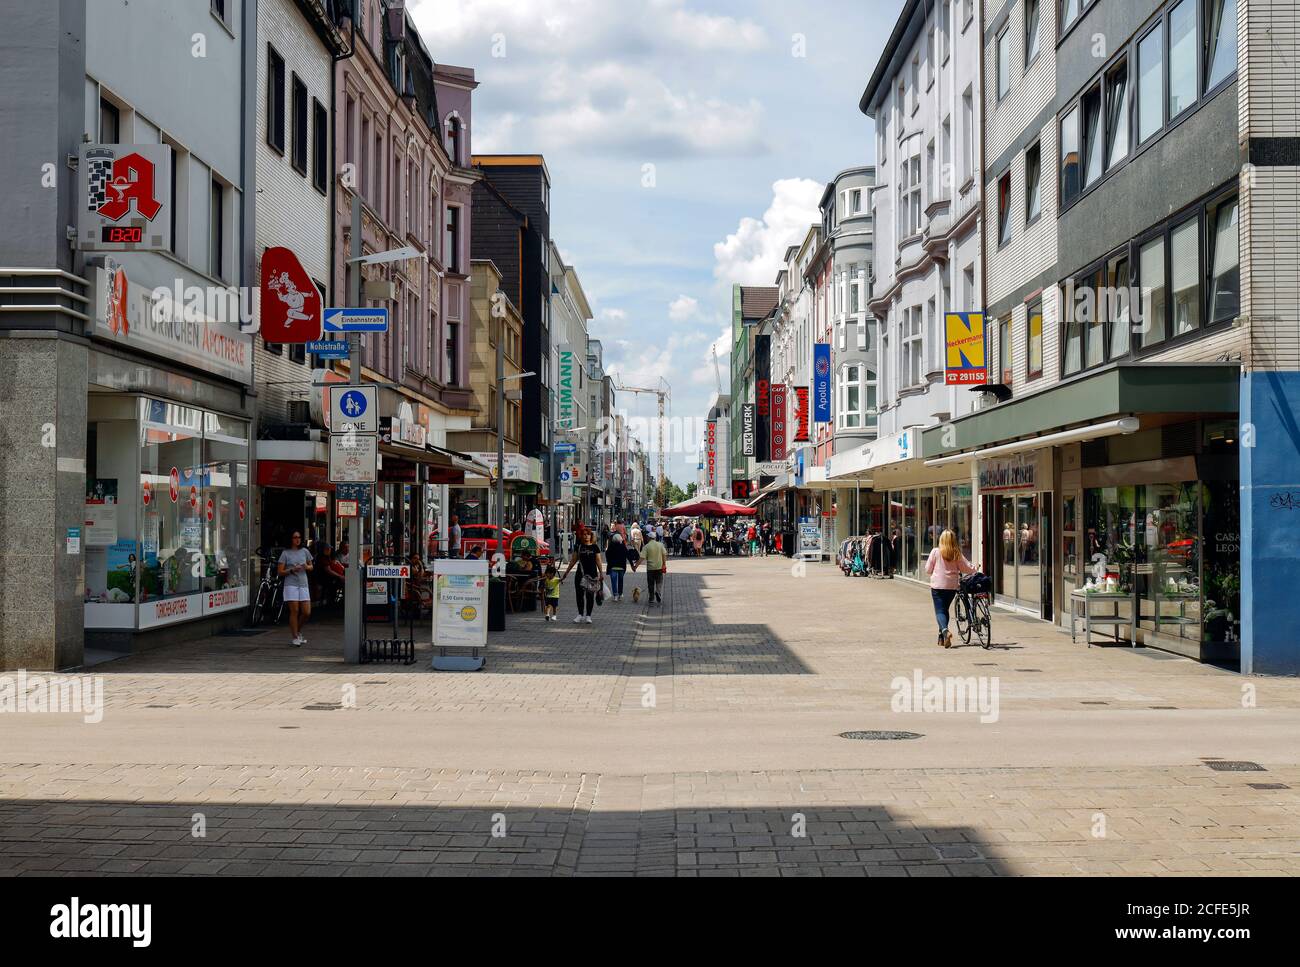 Few passers-by on Marktstrasse, pedestrian zone and shopping street, Oberhausen, Ruhr area, North Rhine-Westphalia, Germany Stock Photo